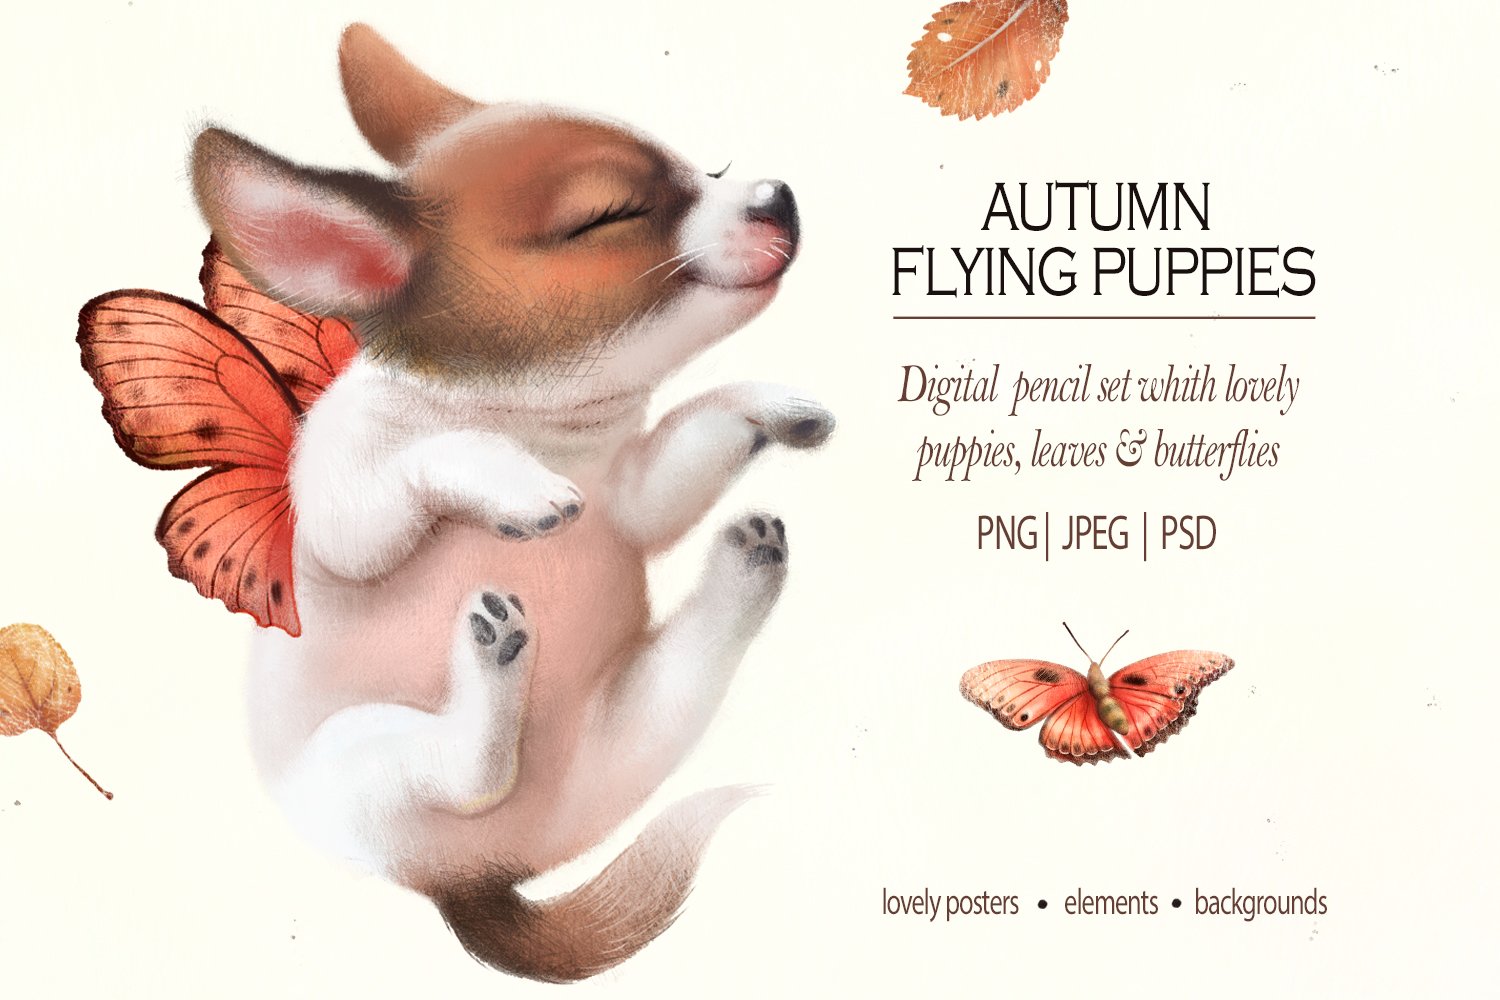 Autumn flying puppies digital pencil cover image.